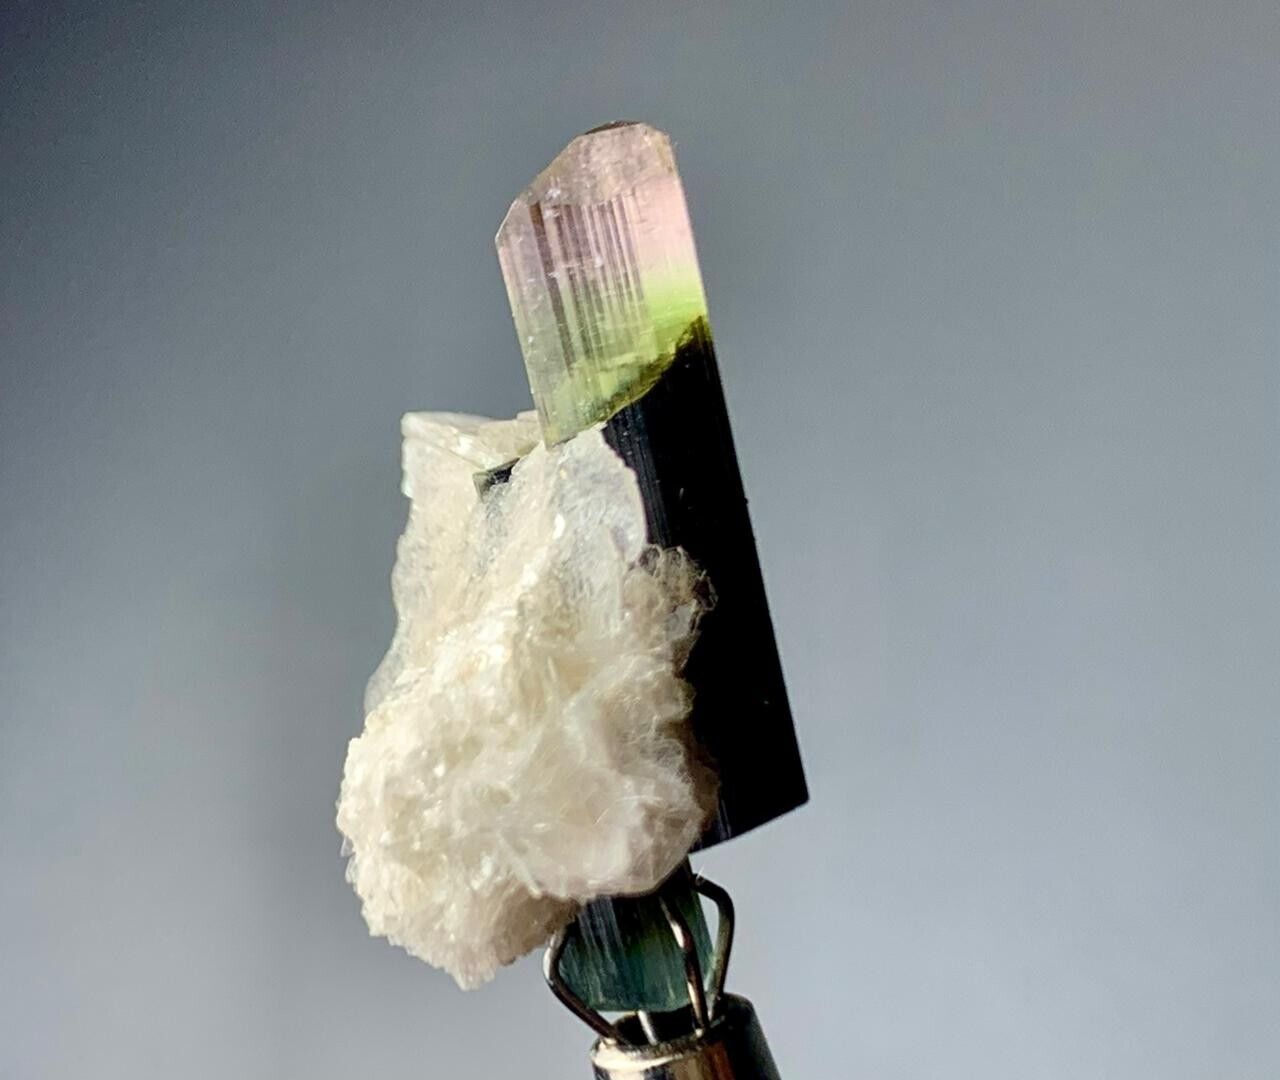 12.50 Carat beautiful terminated tricolor tourmaline crystal with albite @afgh